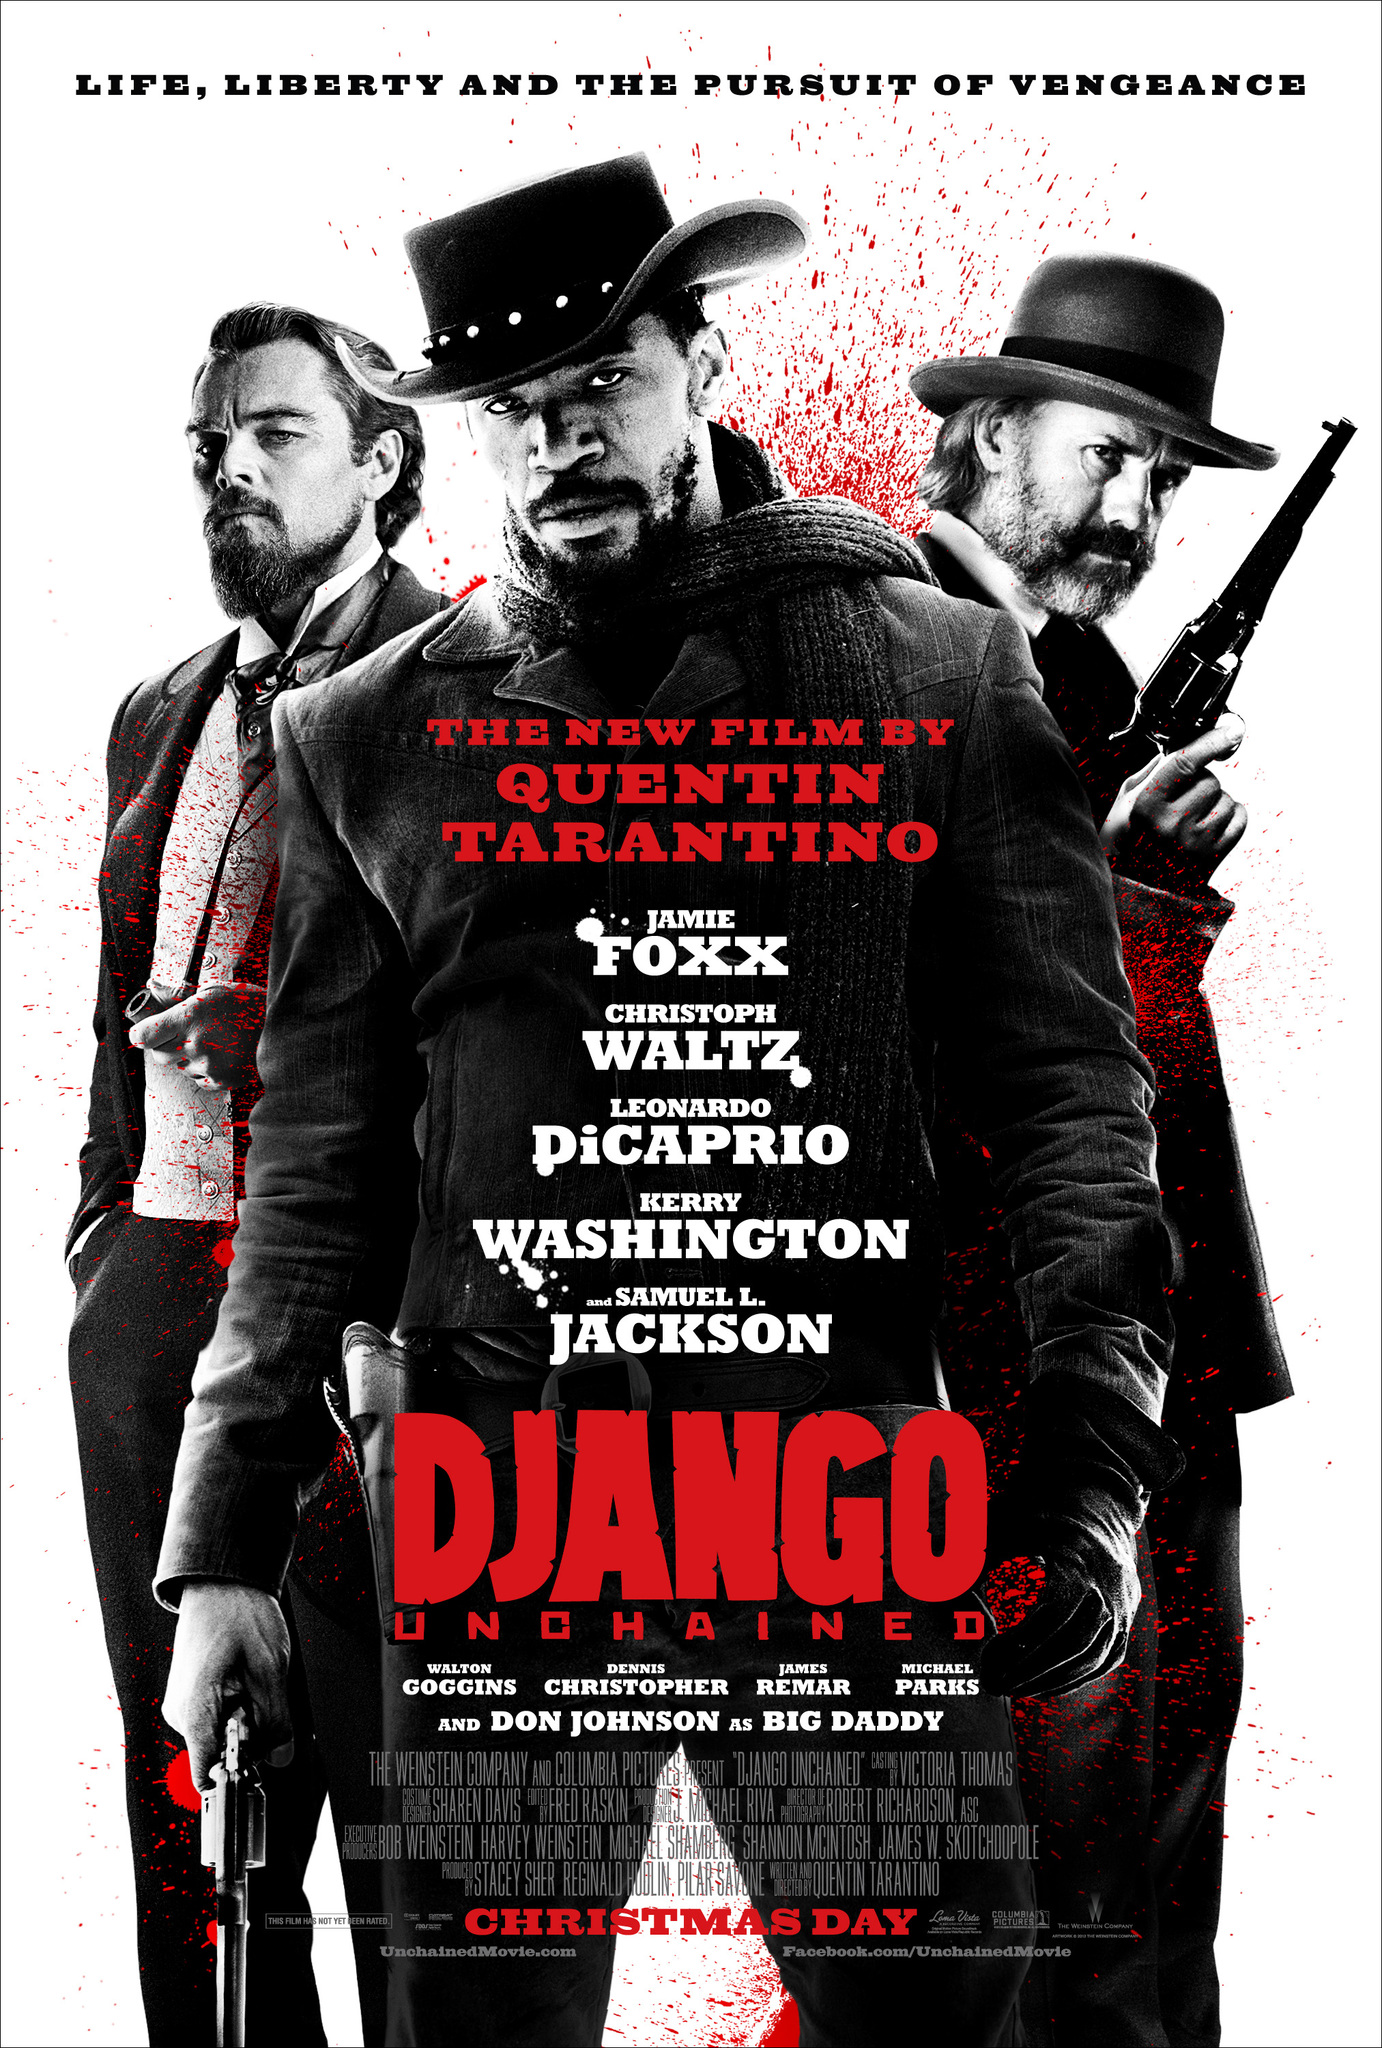 Django Unchained 2012 HDRip AC3 Alemania XviD by Susi & Strolch